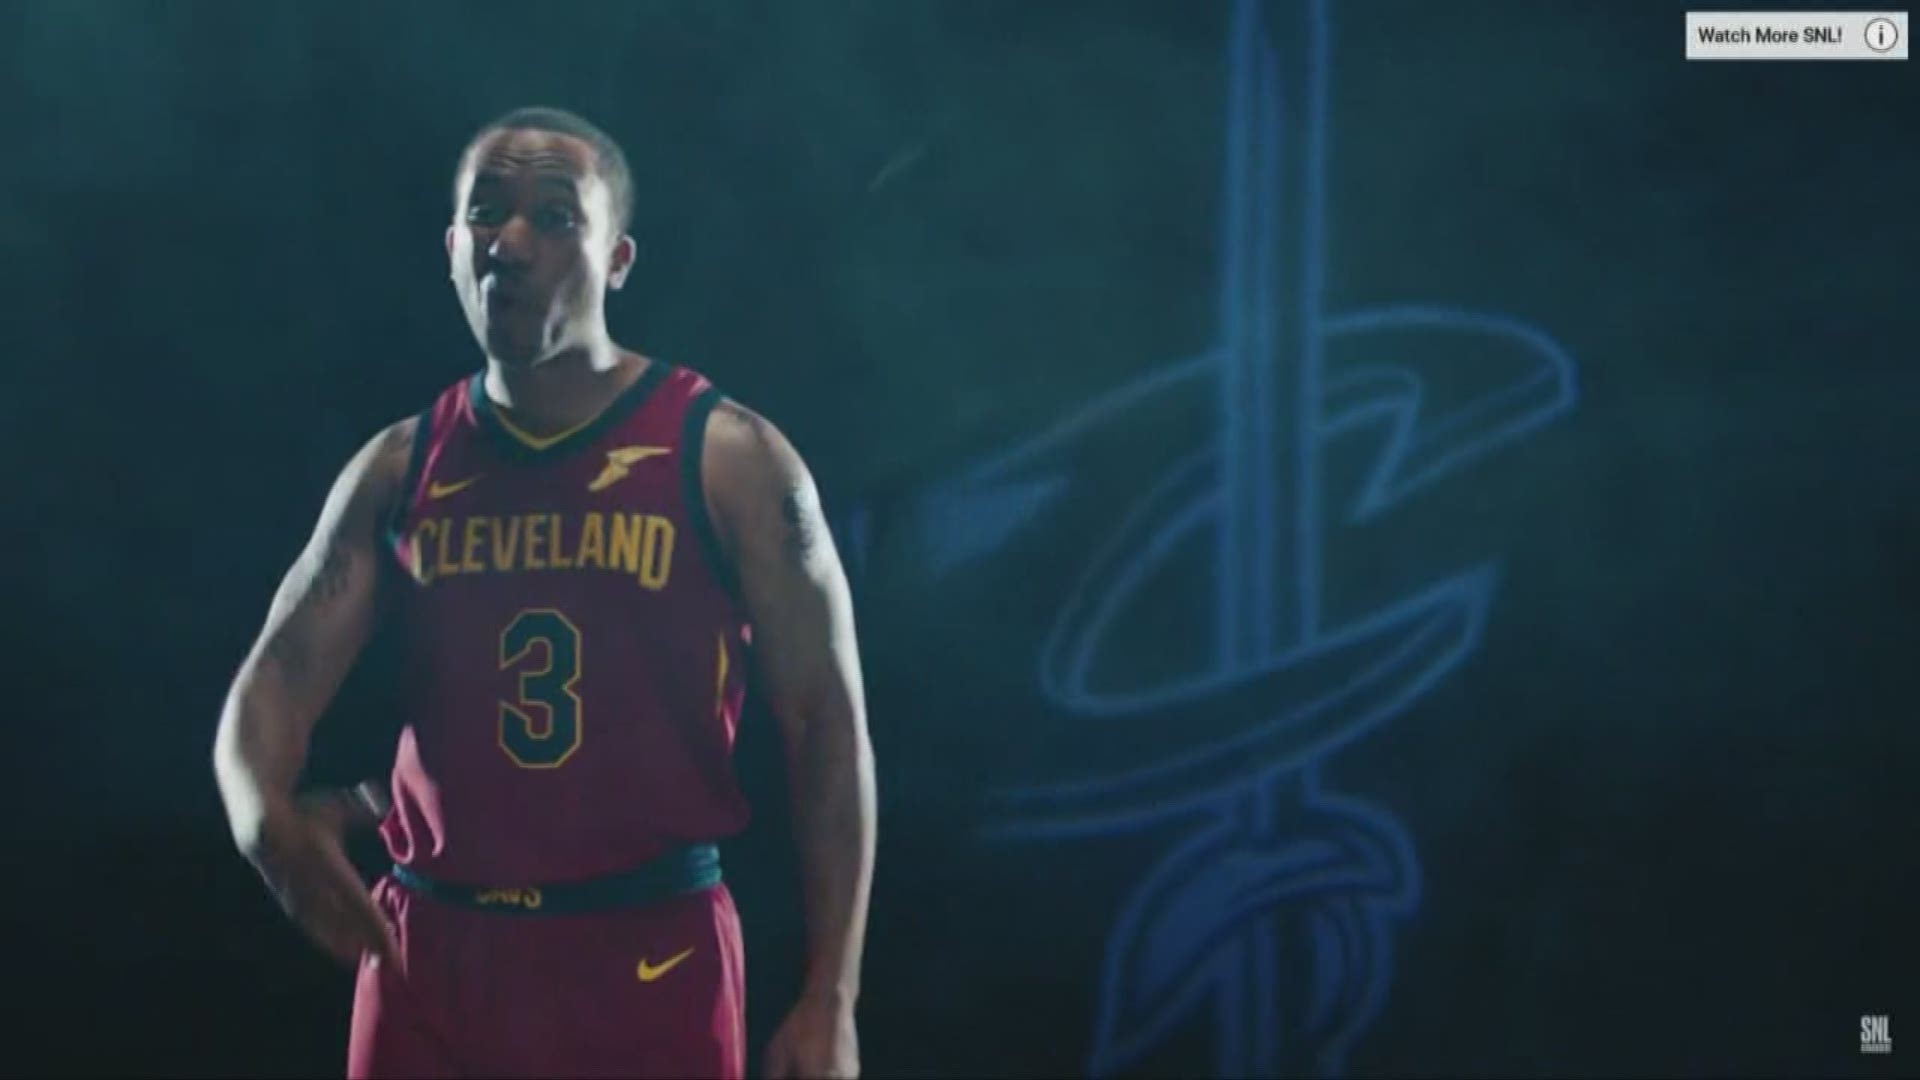 SNL skit features "other cavaliers'